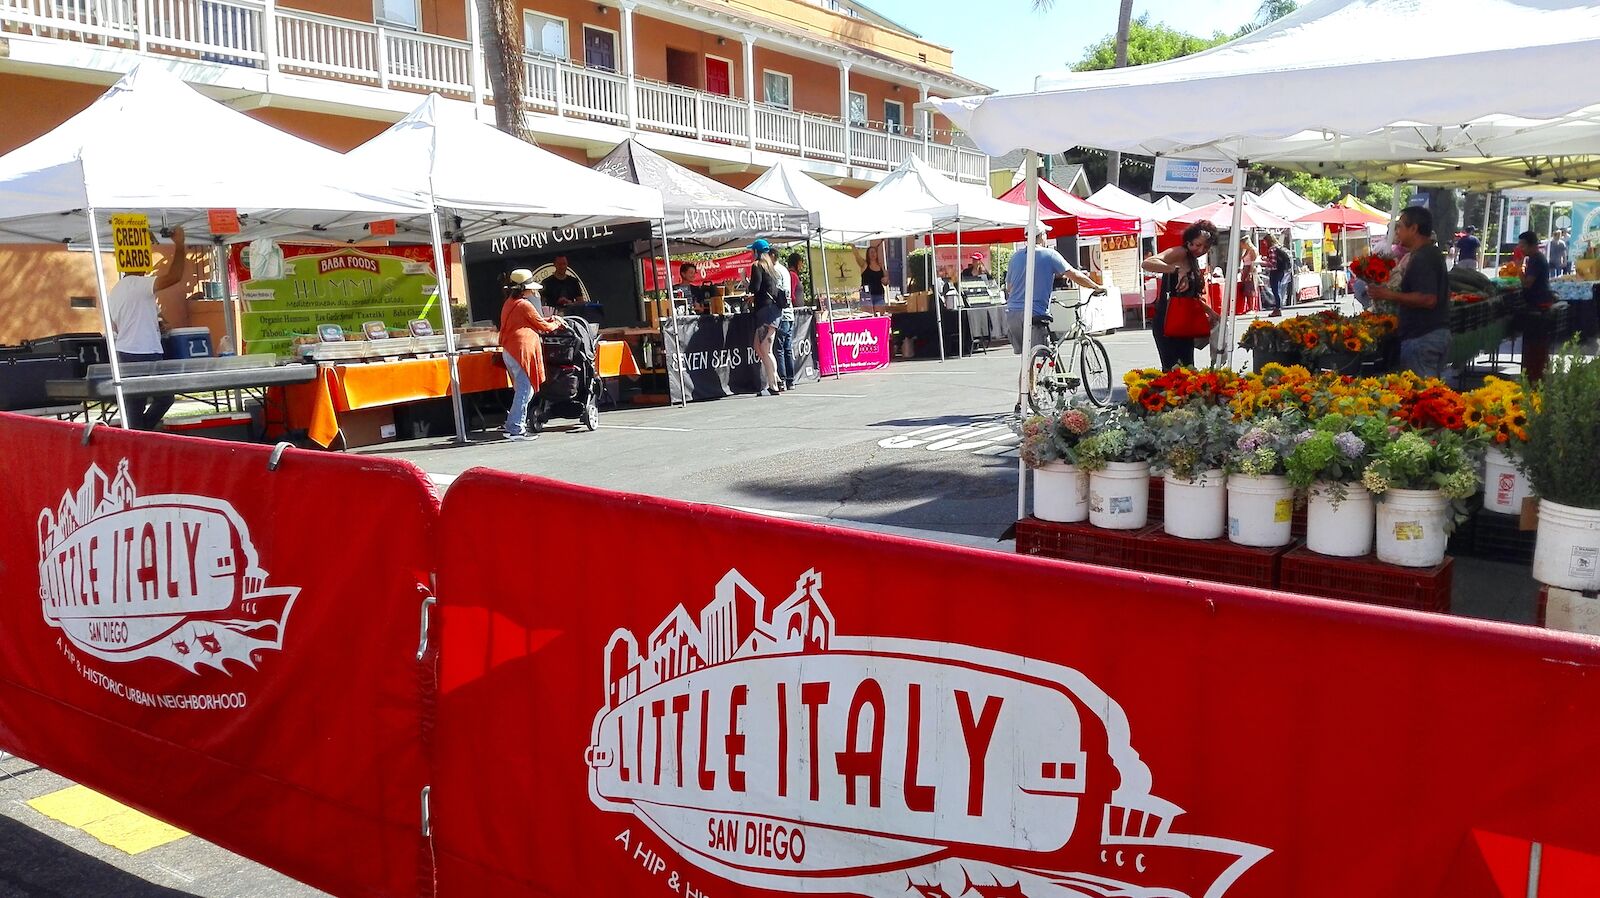 Little Italy farmer's market with vendors selling flowers and other goods